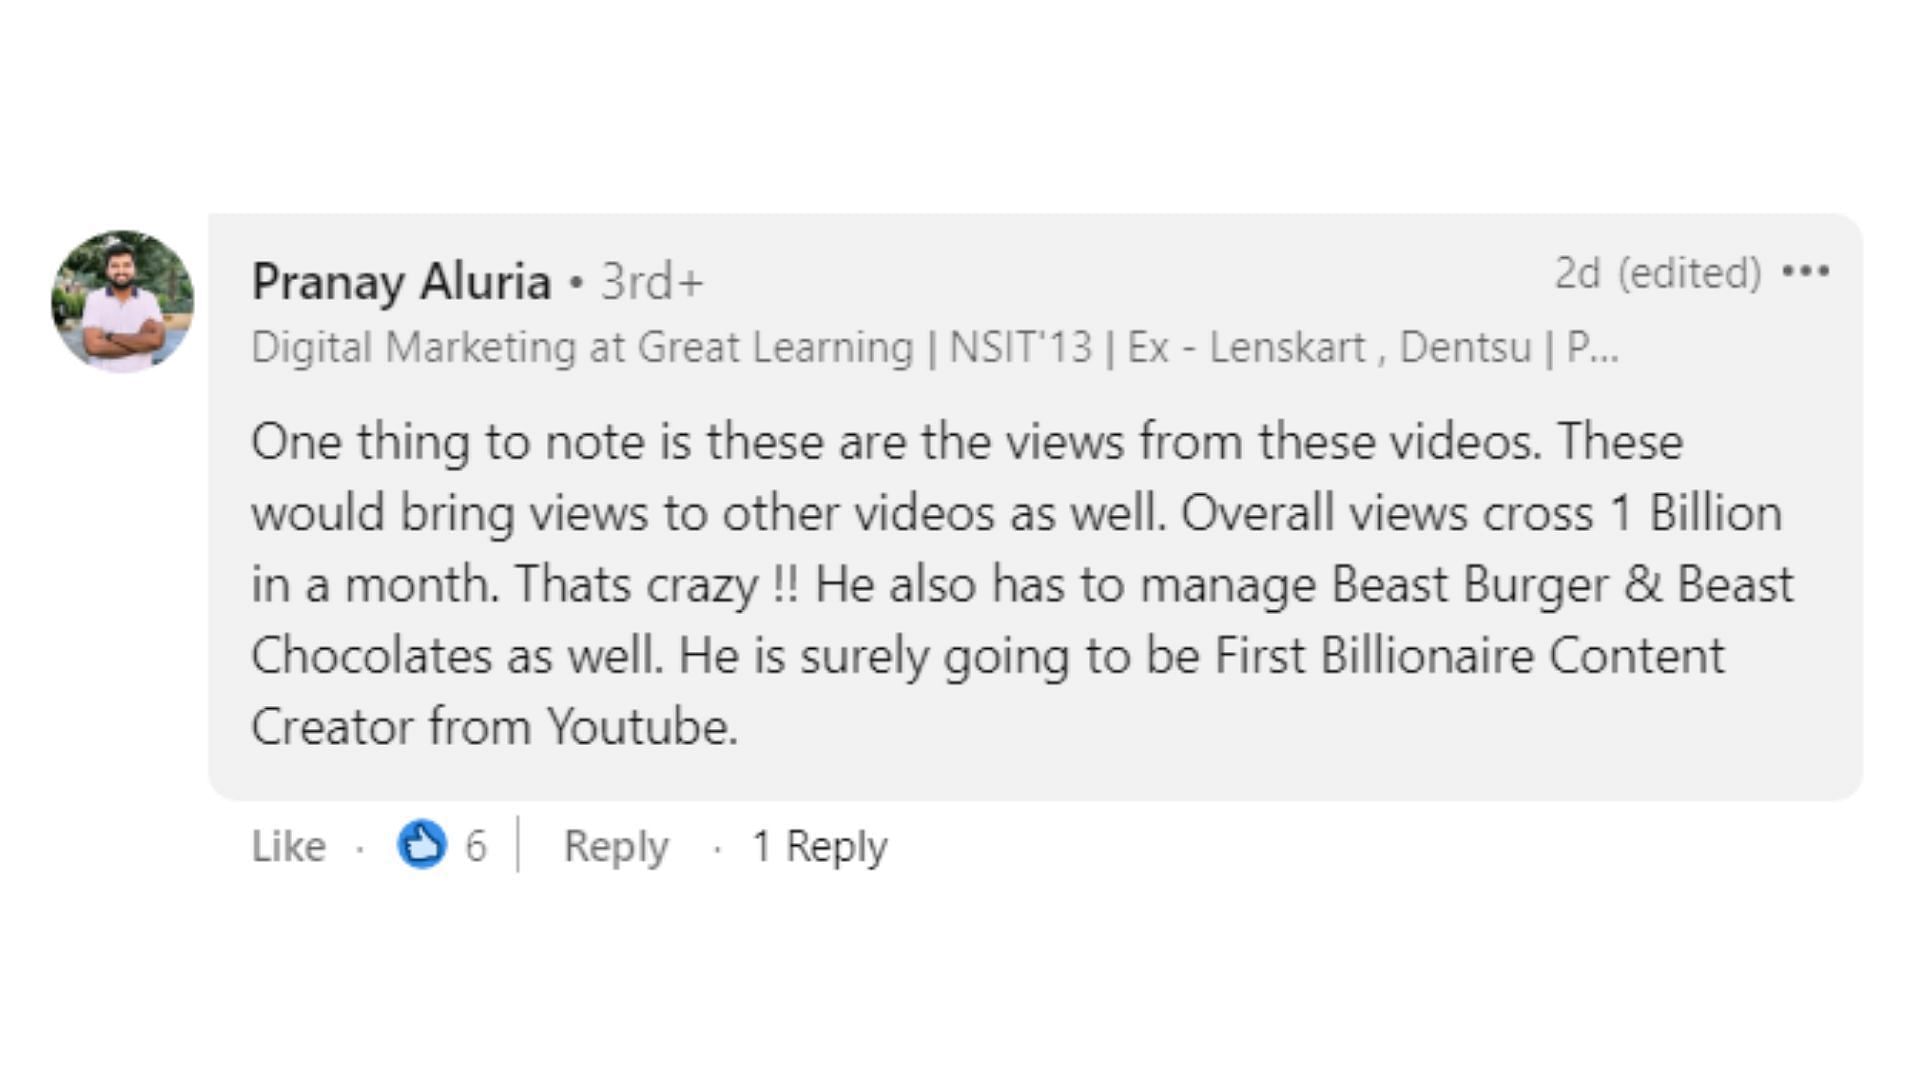 &quot;He is surely going to be (the) First Billionaire Content Creator from YouTube (image via LinkedIn)